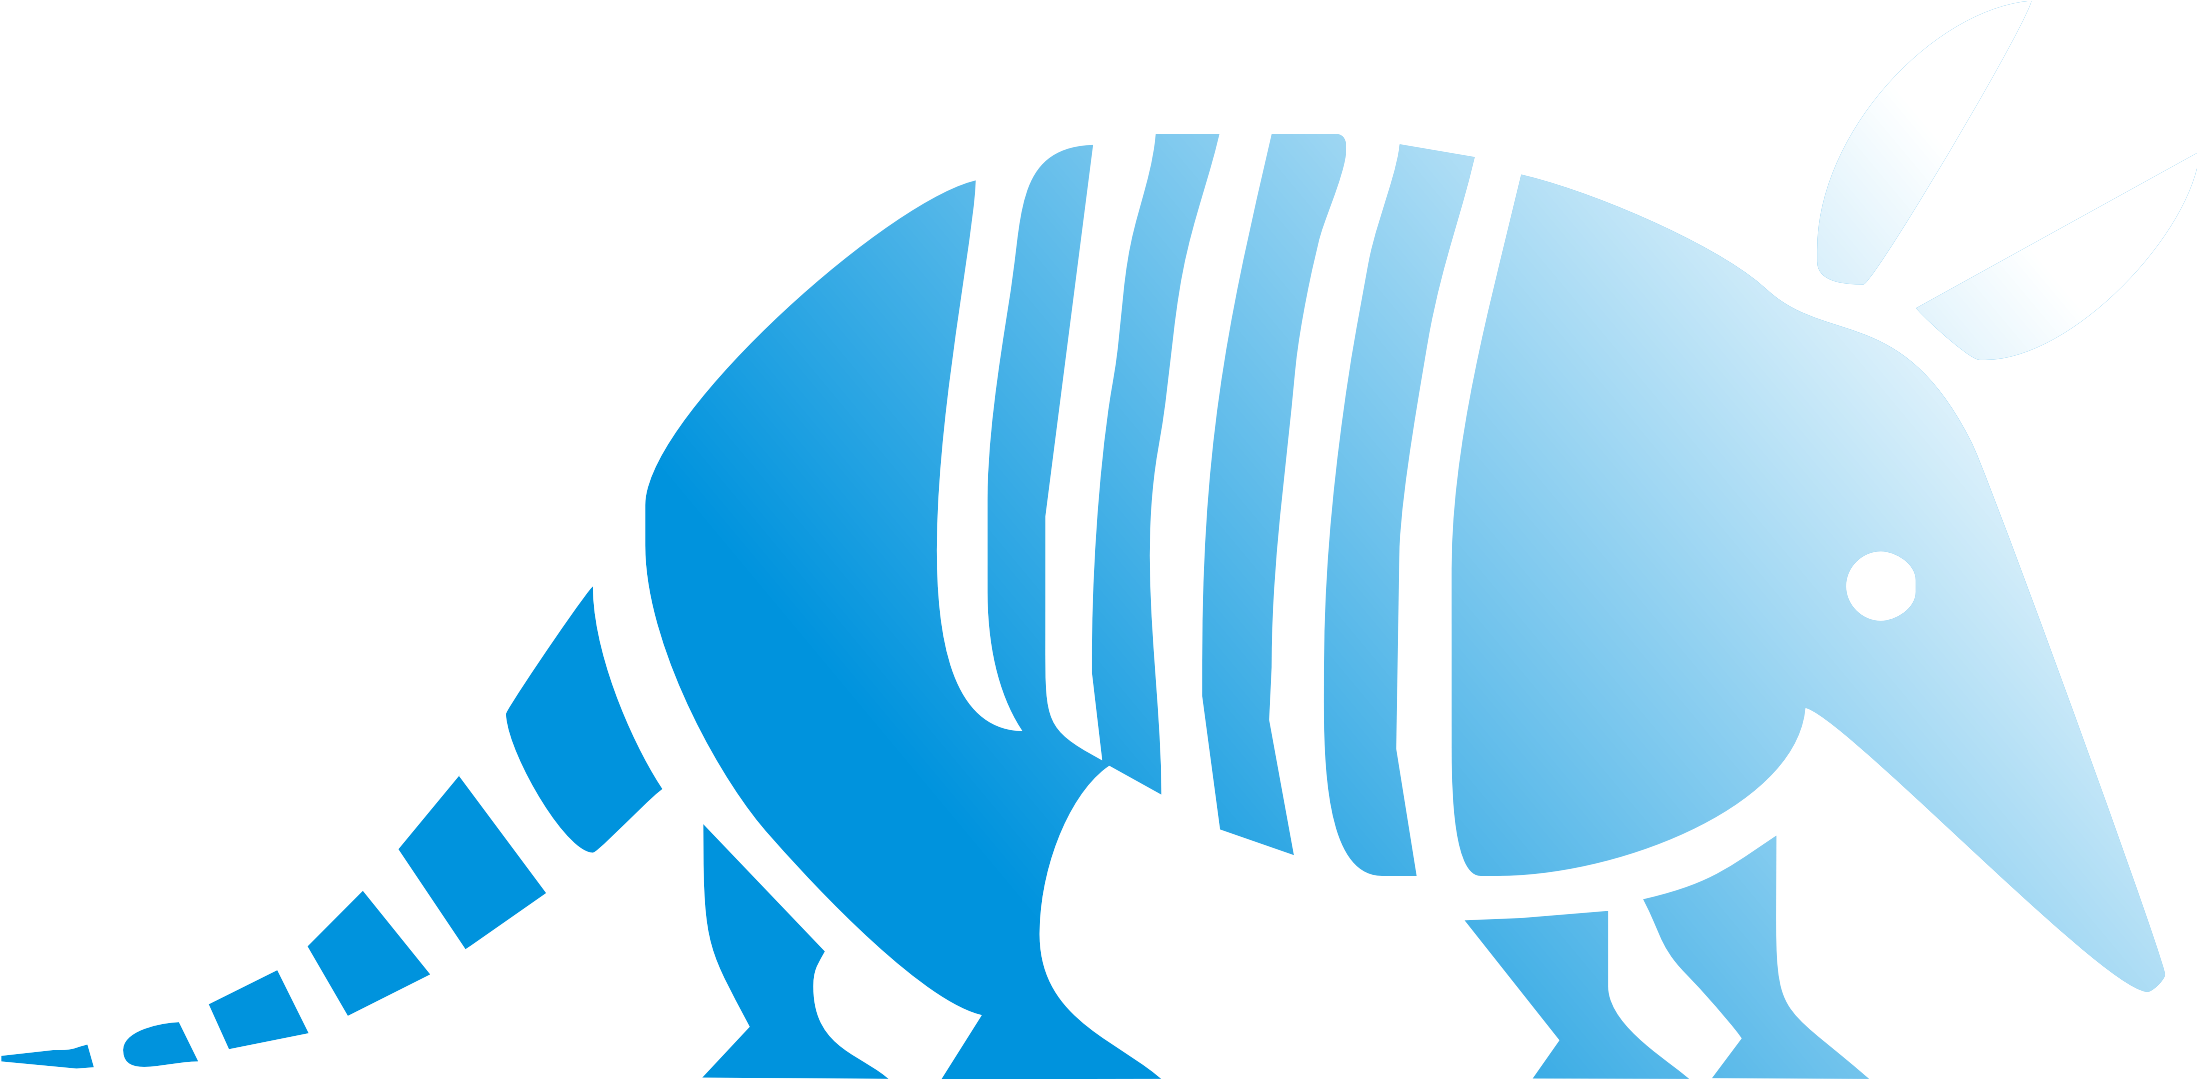 A Blue Striped Animal With Black Background